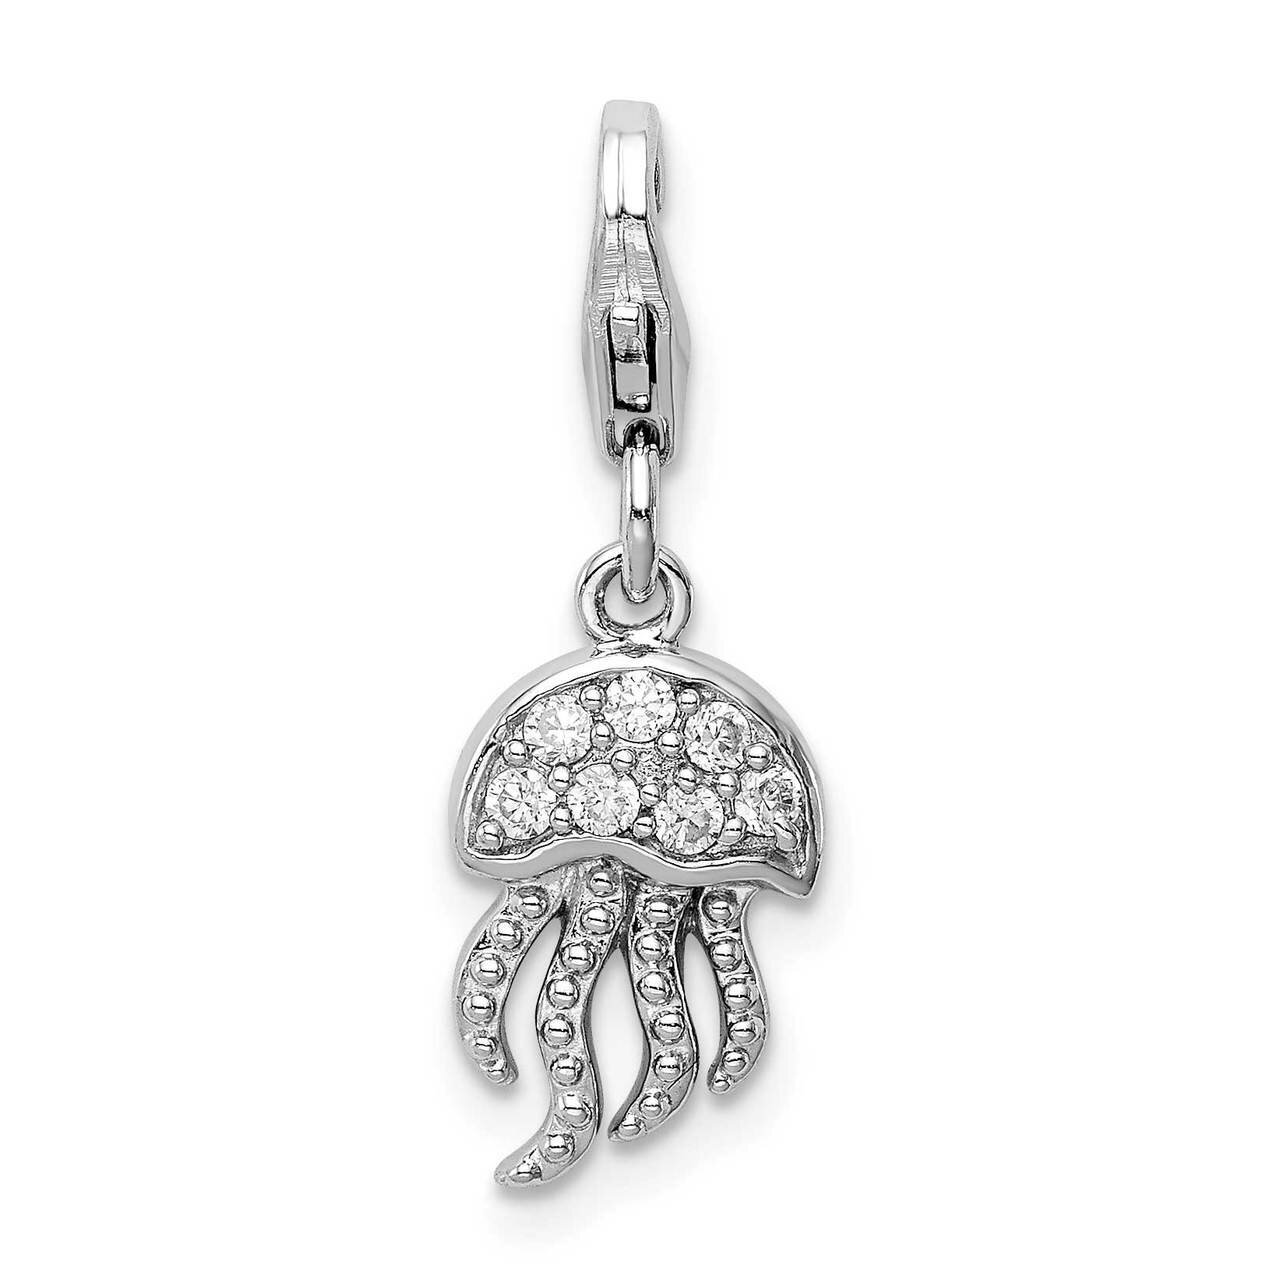 Jellyfish with Lobster Clasp Charm Sterling Silver Rhodium-plated CZ Diamond QC9592